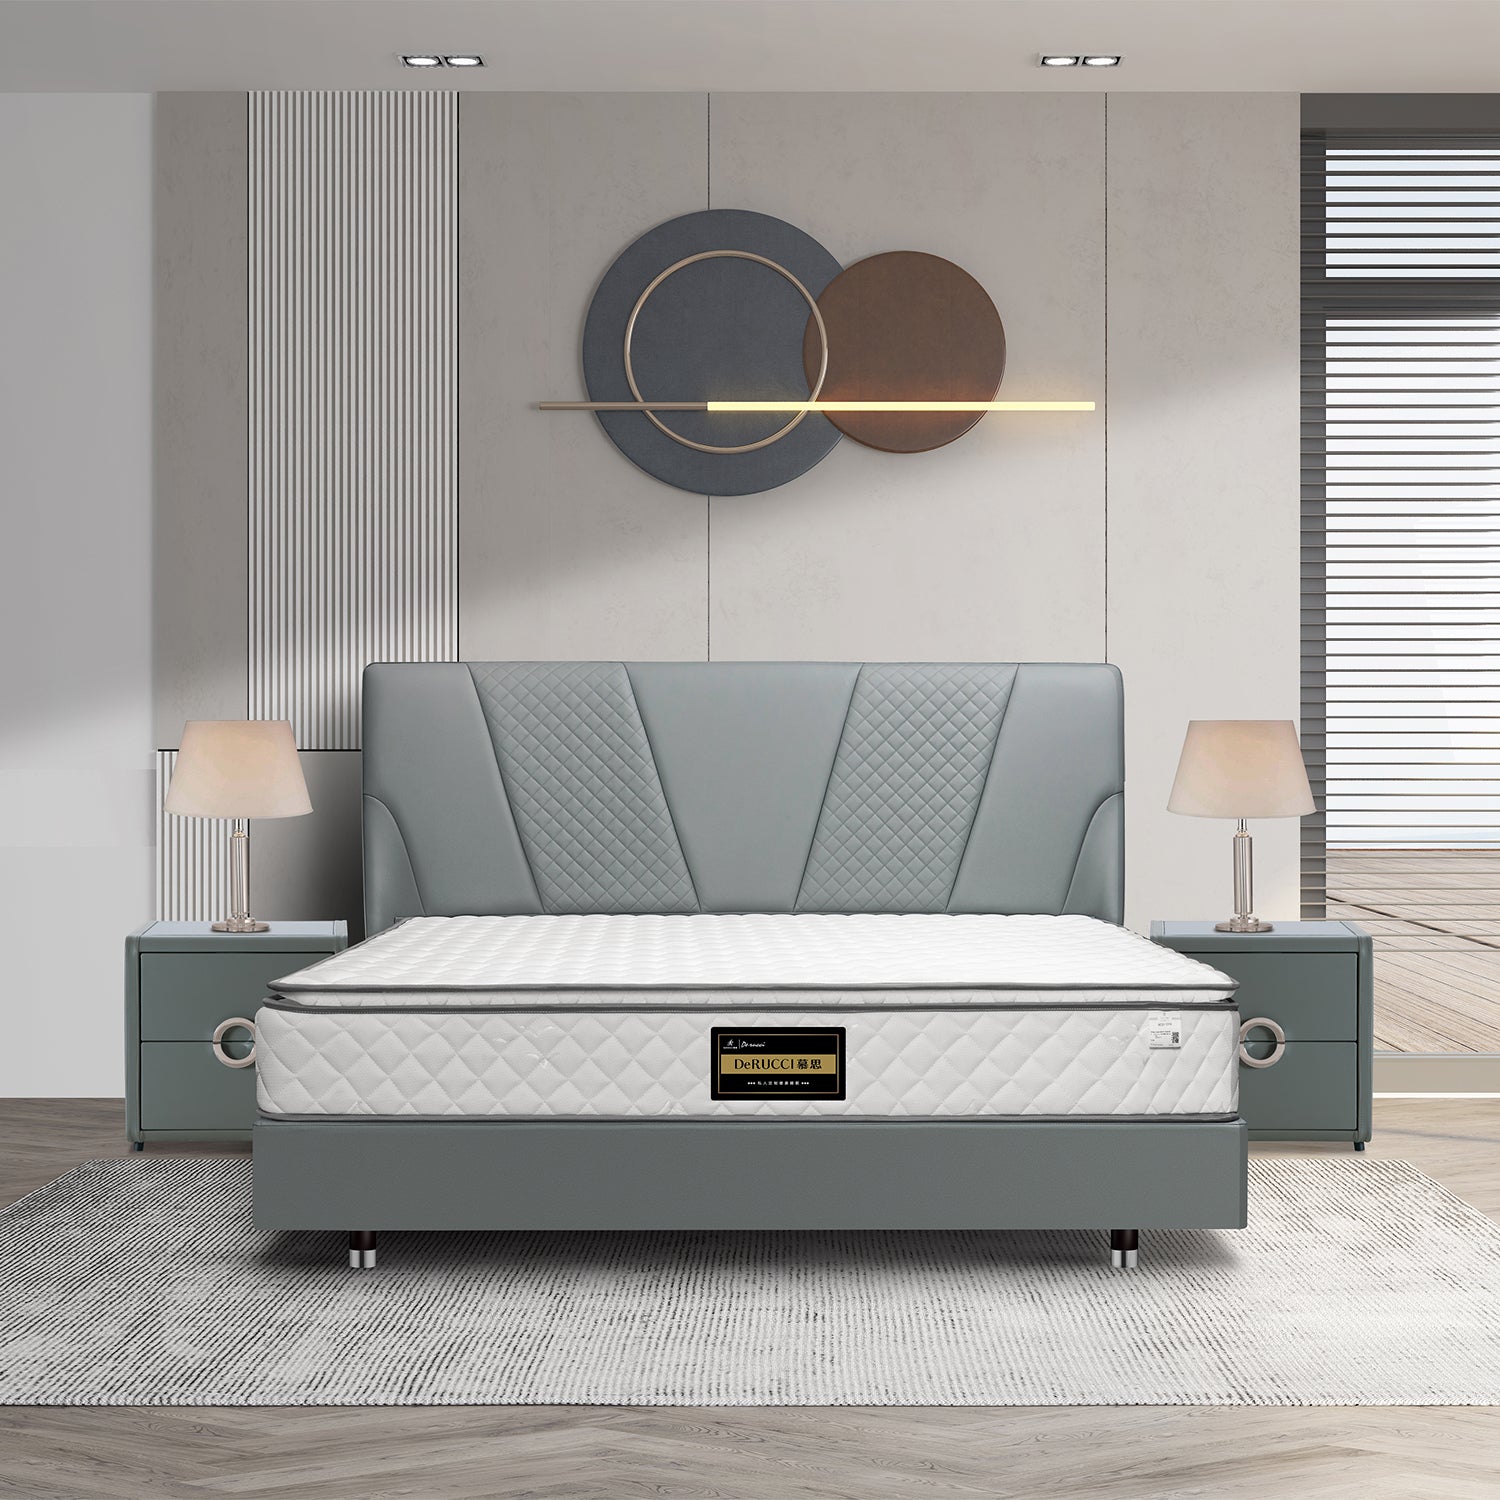 Modern gray bed frame with white mattress by DeRUCCI in a stylish bedroom. Features include bedside tables with lamps and decorative wall art.